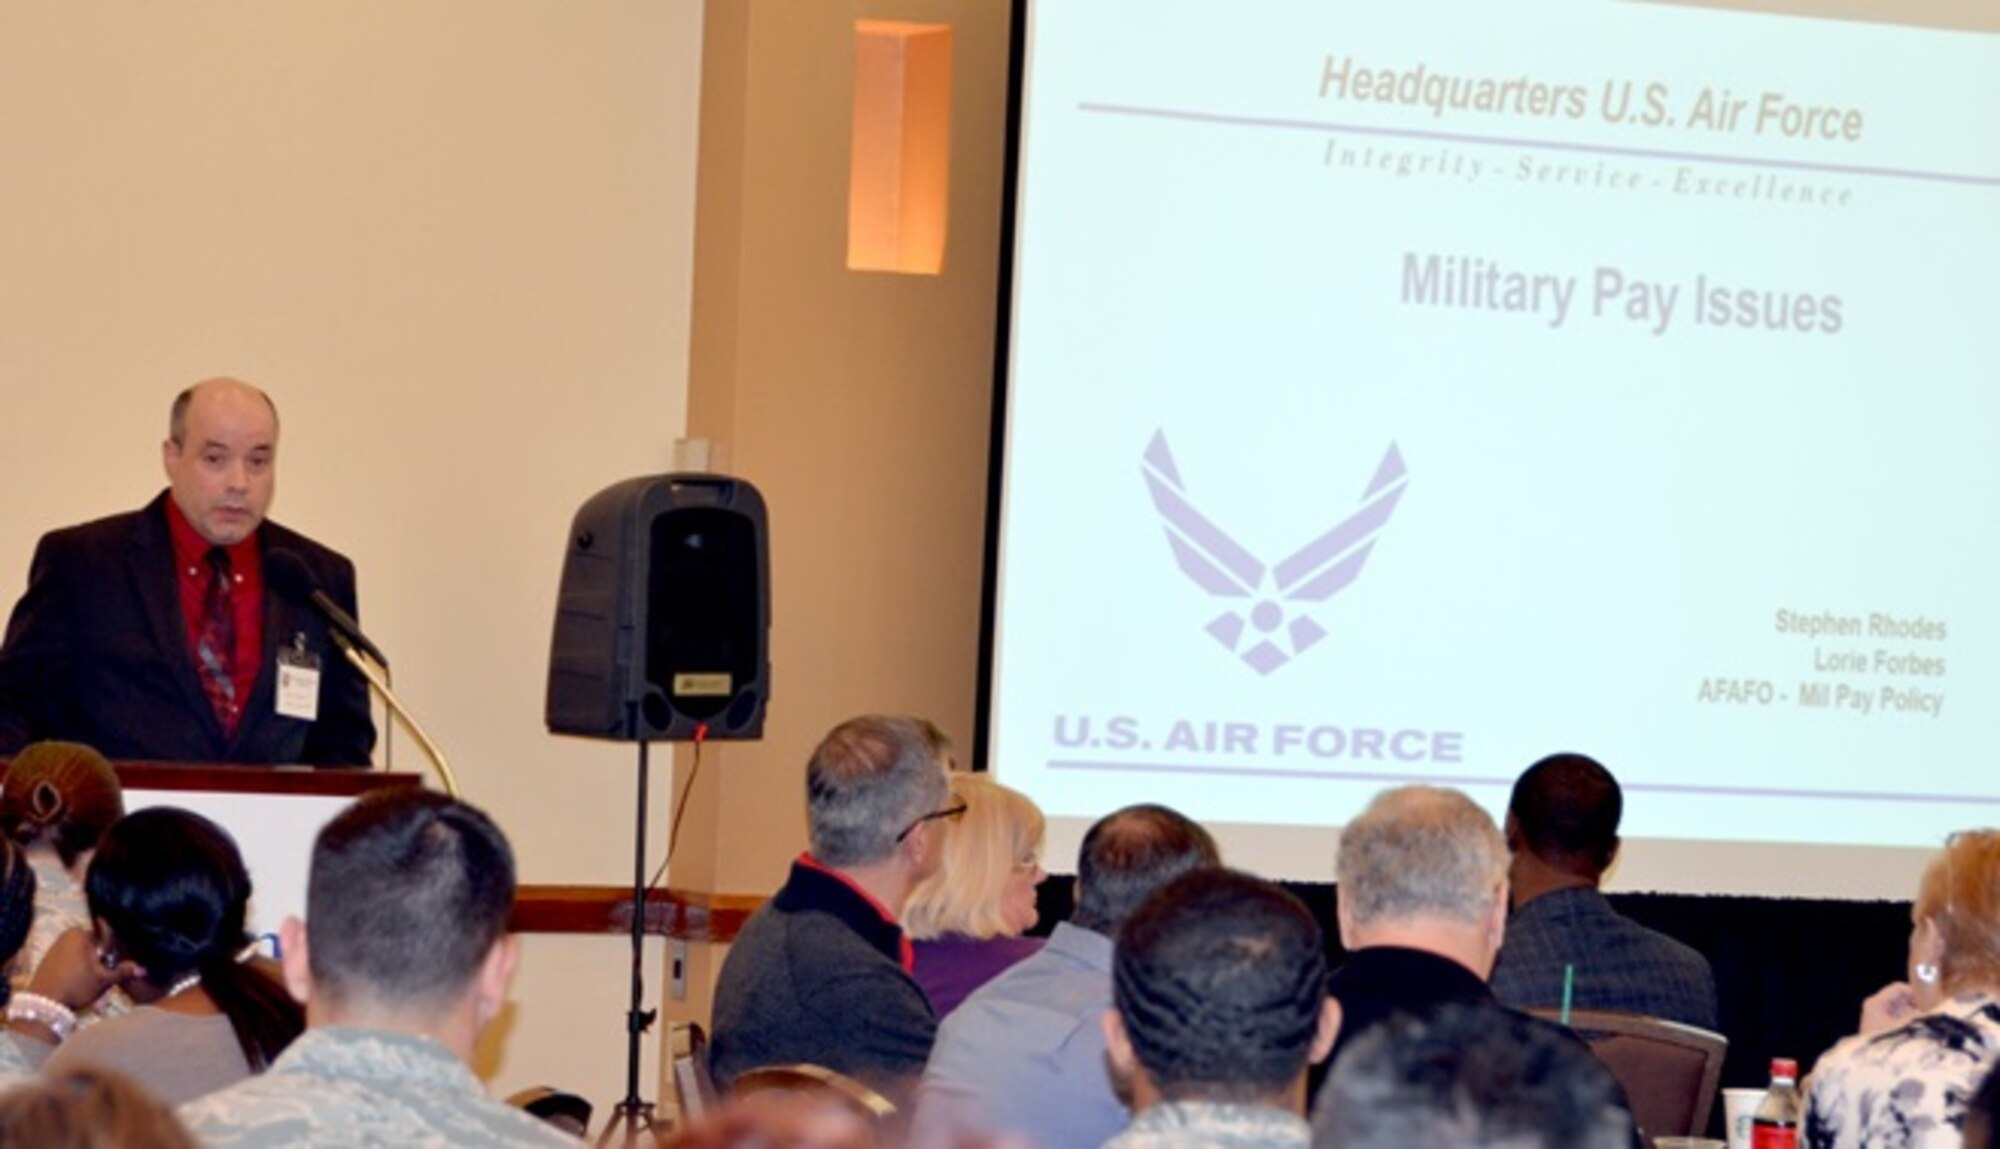 Stephen Rhodes, Air Force Accounting and Finance Office military pay analyst, addresses questions from attendees during the 2018 Air Force Financial Services Workshop in San Antonio, Jan. 30.